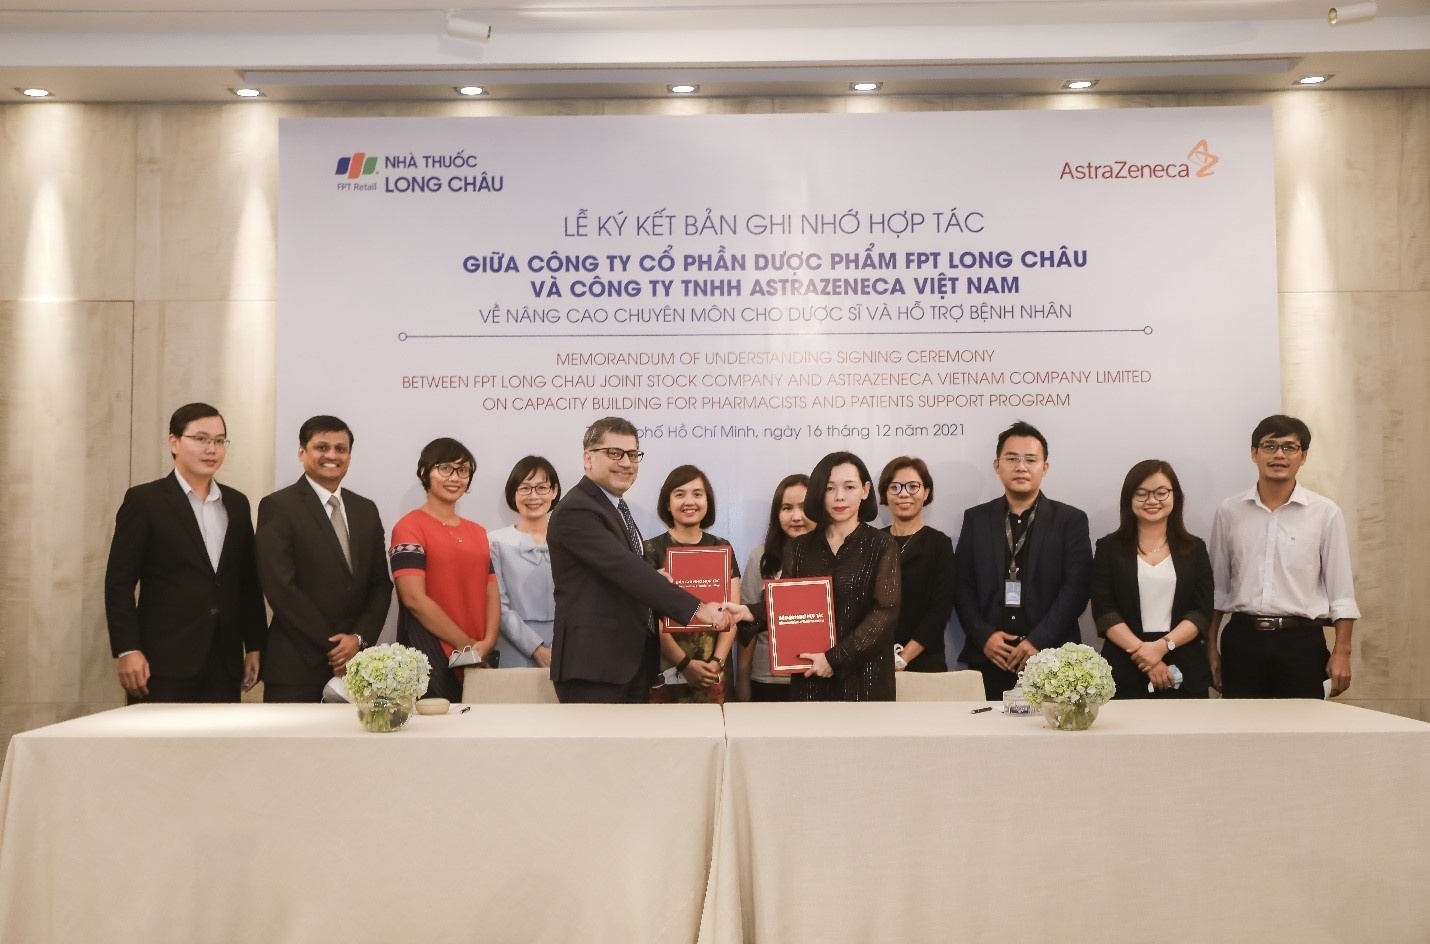 FPT Long Chau and AstraZeneca join hands to strengthen Vietnamese healthcare